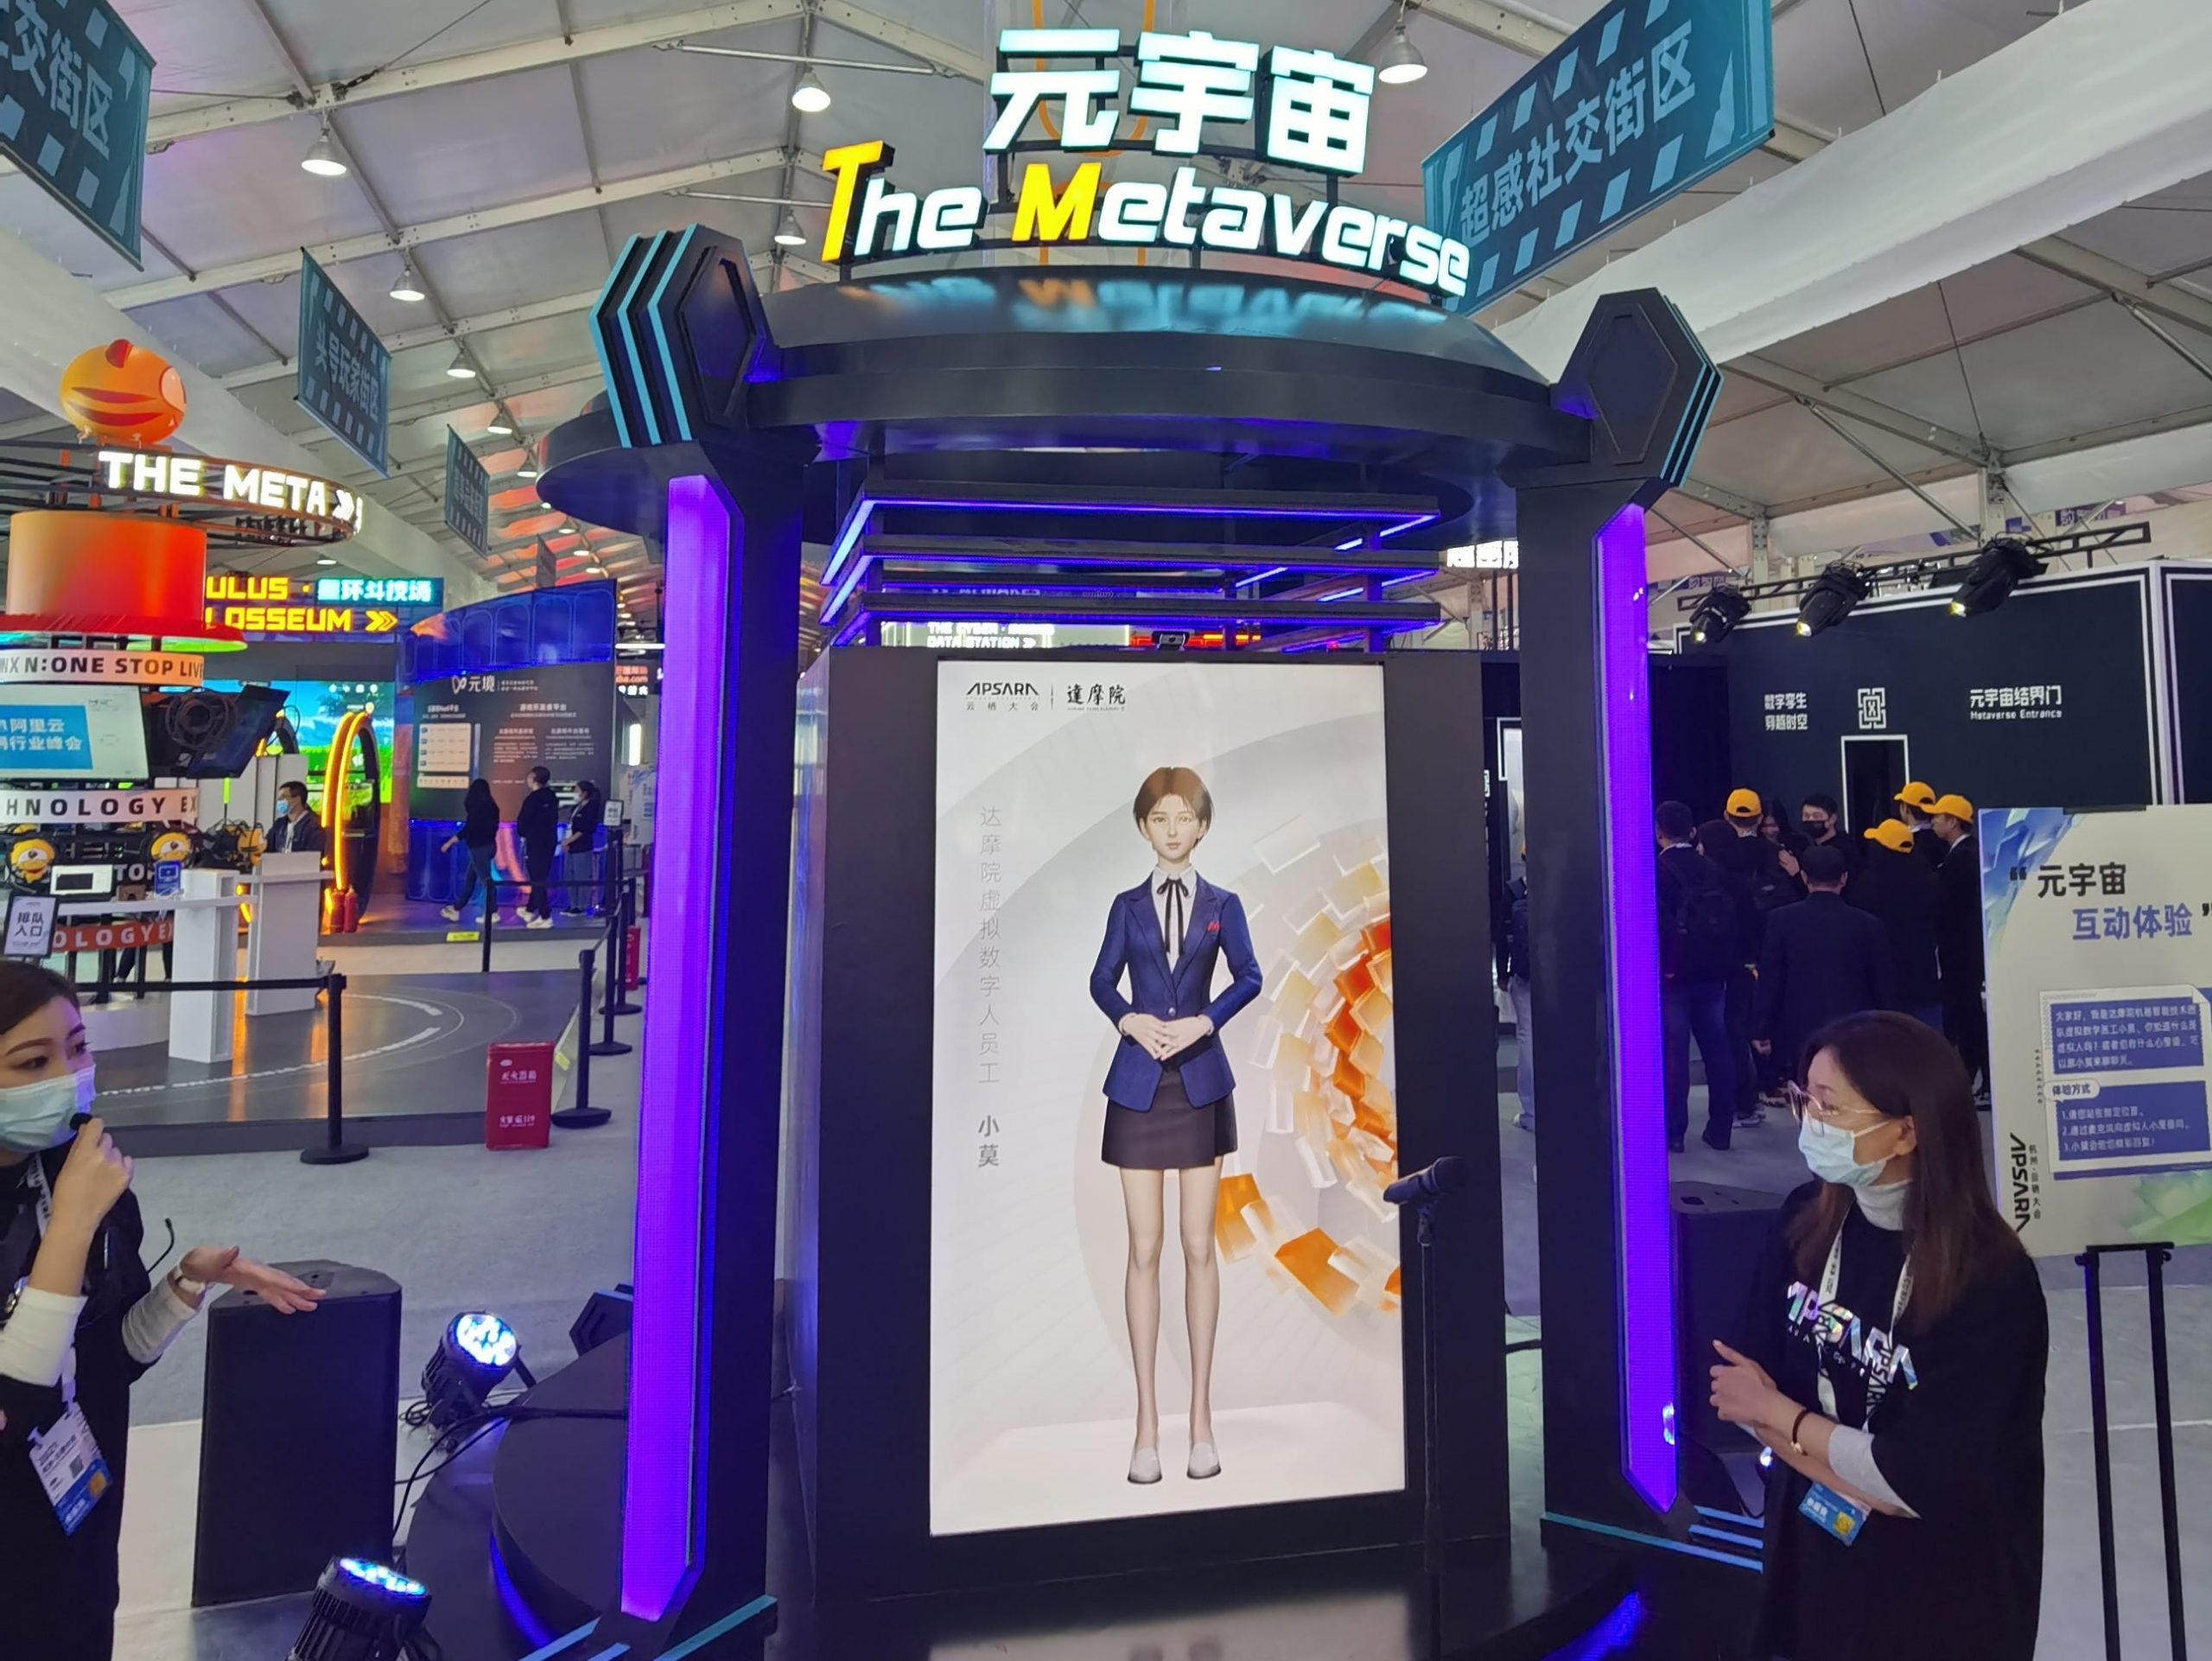 The Metaverse booth at a tech fair in China.